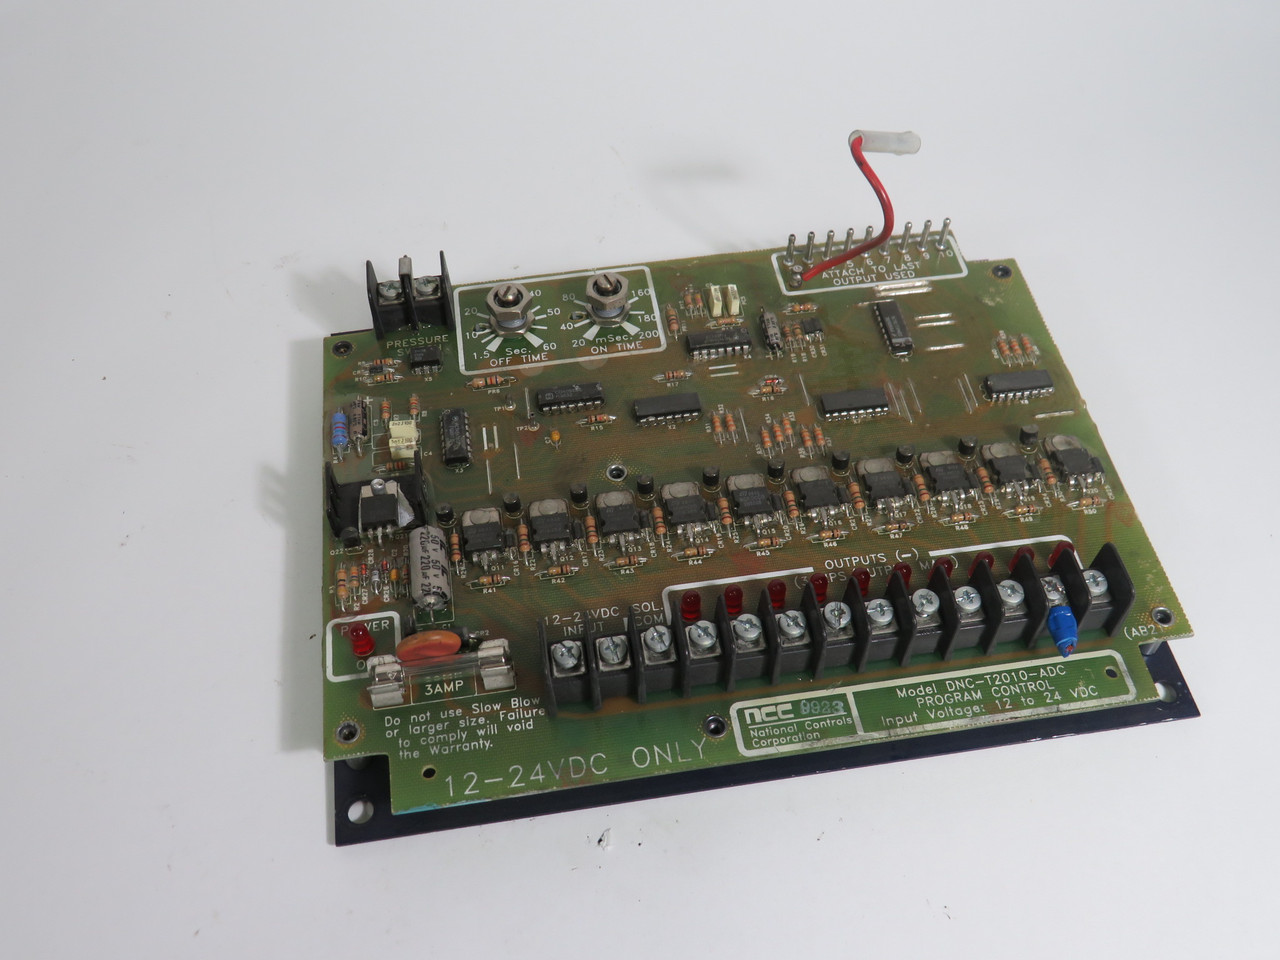 NCC DNC-T2010-ADC Program Control Board 12-24VDC AS IS